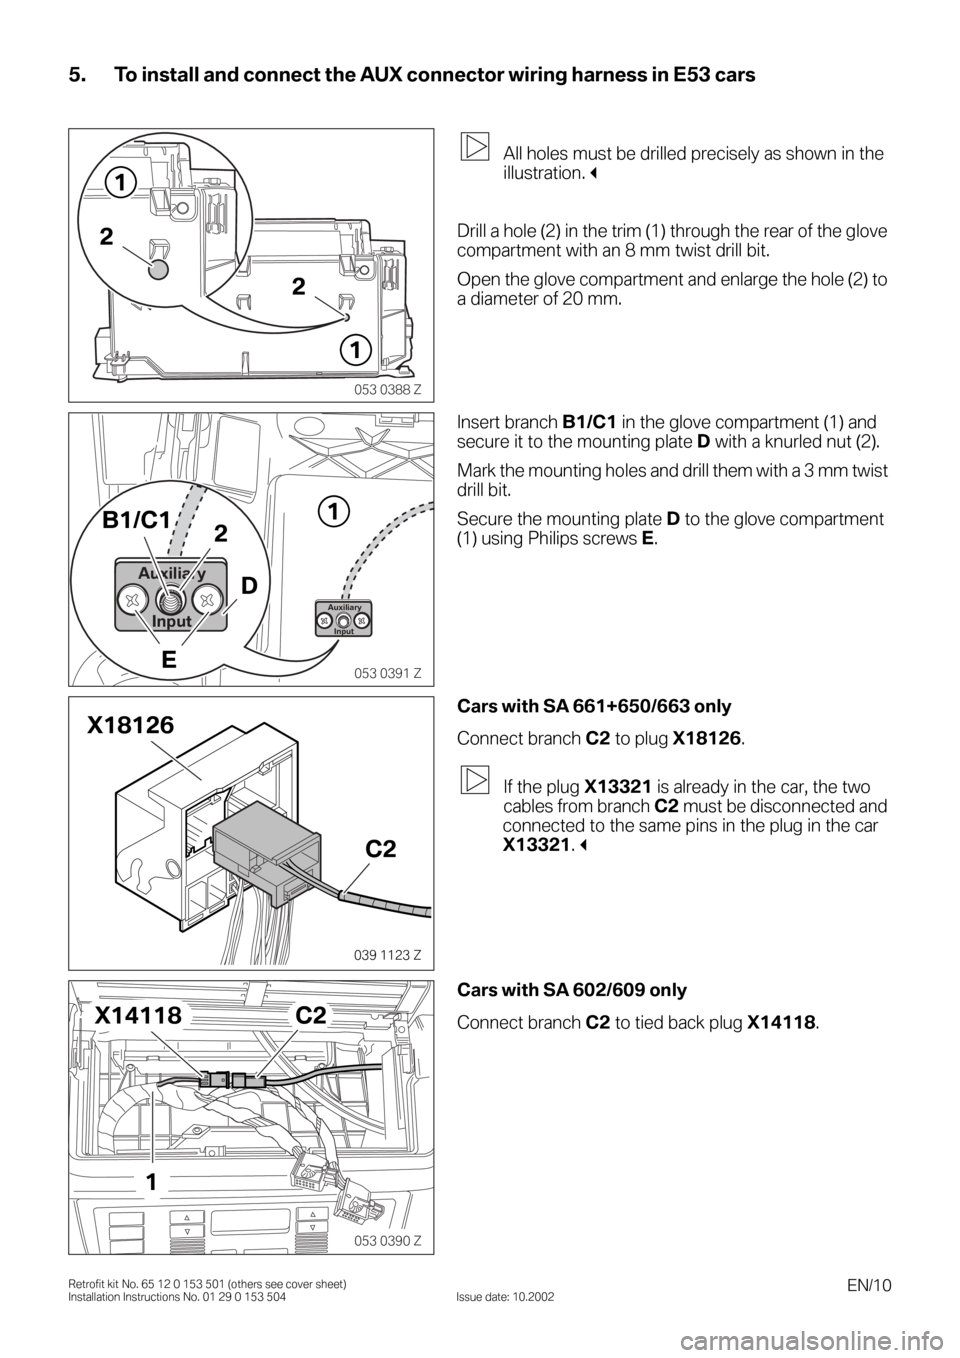 BMW 3 SERIES 2004 E46 Auxilliary Connector Installation Instruction Manual EN/10Retrofit kit No. 65 12 0 153 501 (others see cover sheet)
Installation Instructions No. 01 29 0 153 504 Issue date: 10.2002
5. To install and connect the AUX connector wiring harness in E53 cars
